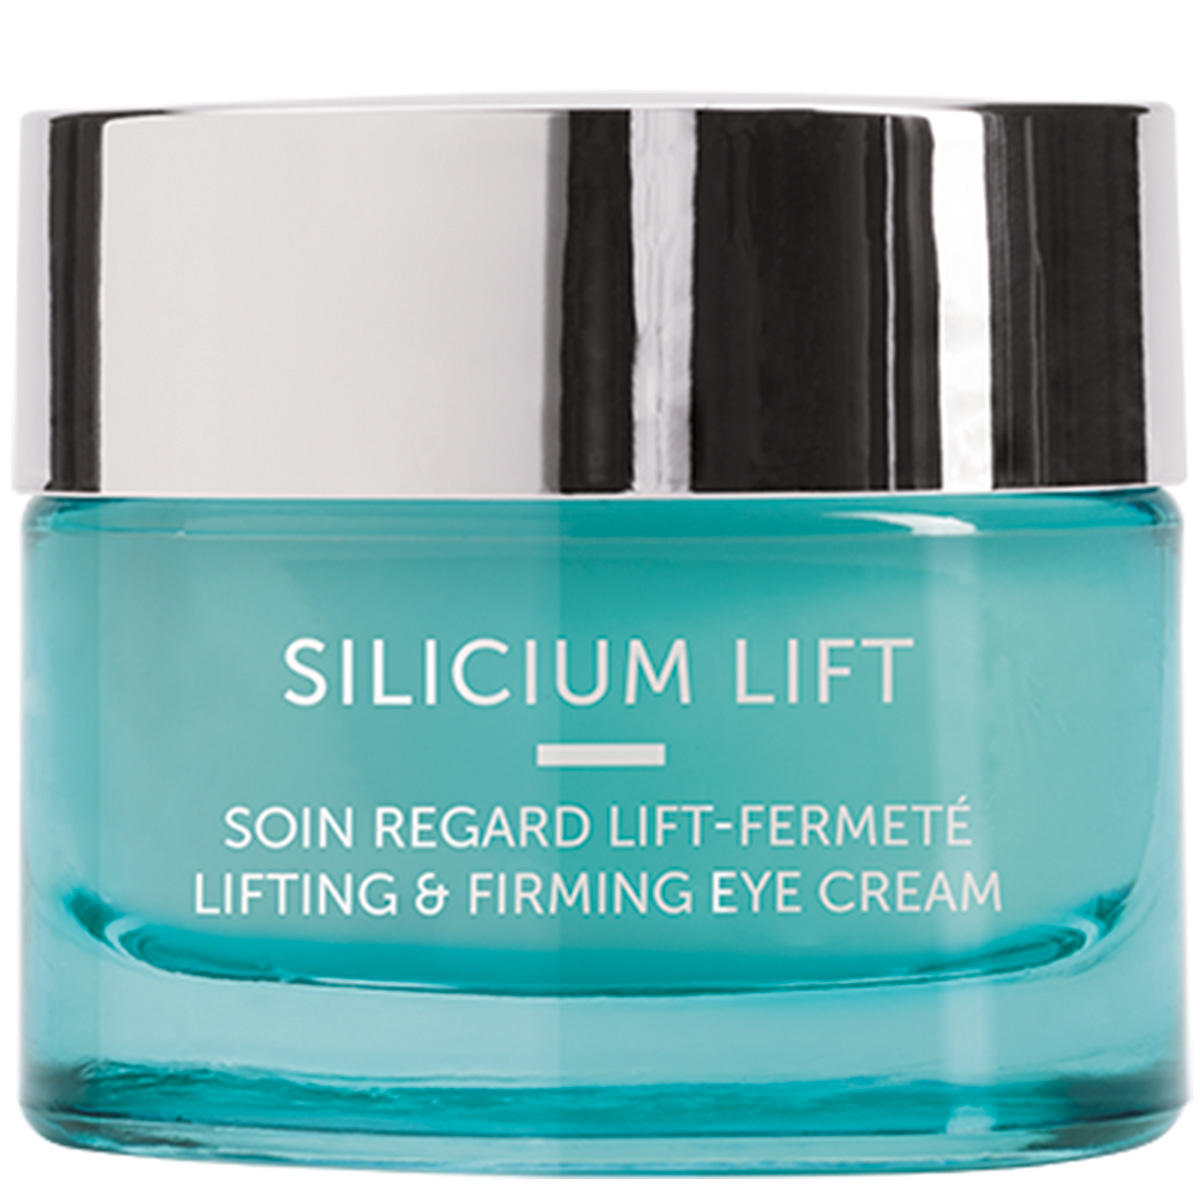 THALGO SILICIUM LIFT Eye cream with lifting effect 15 ml - 1